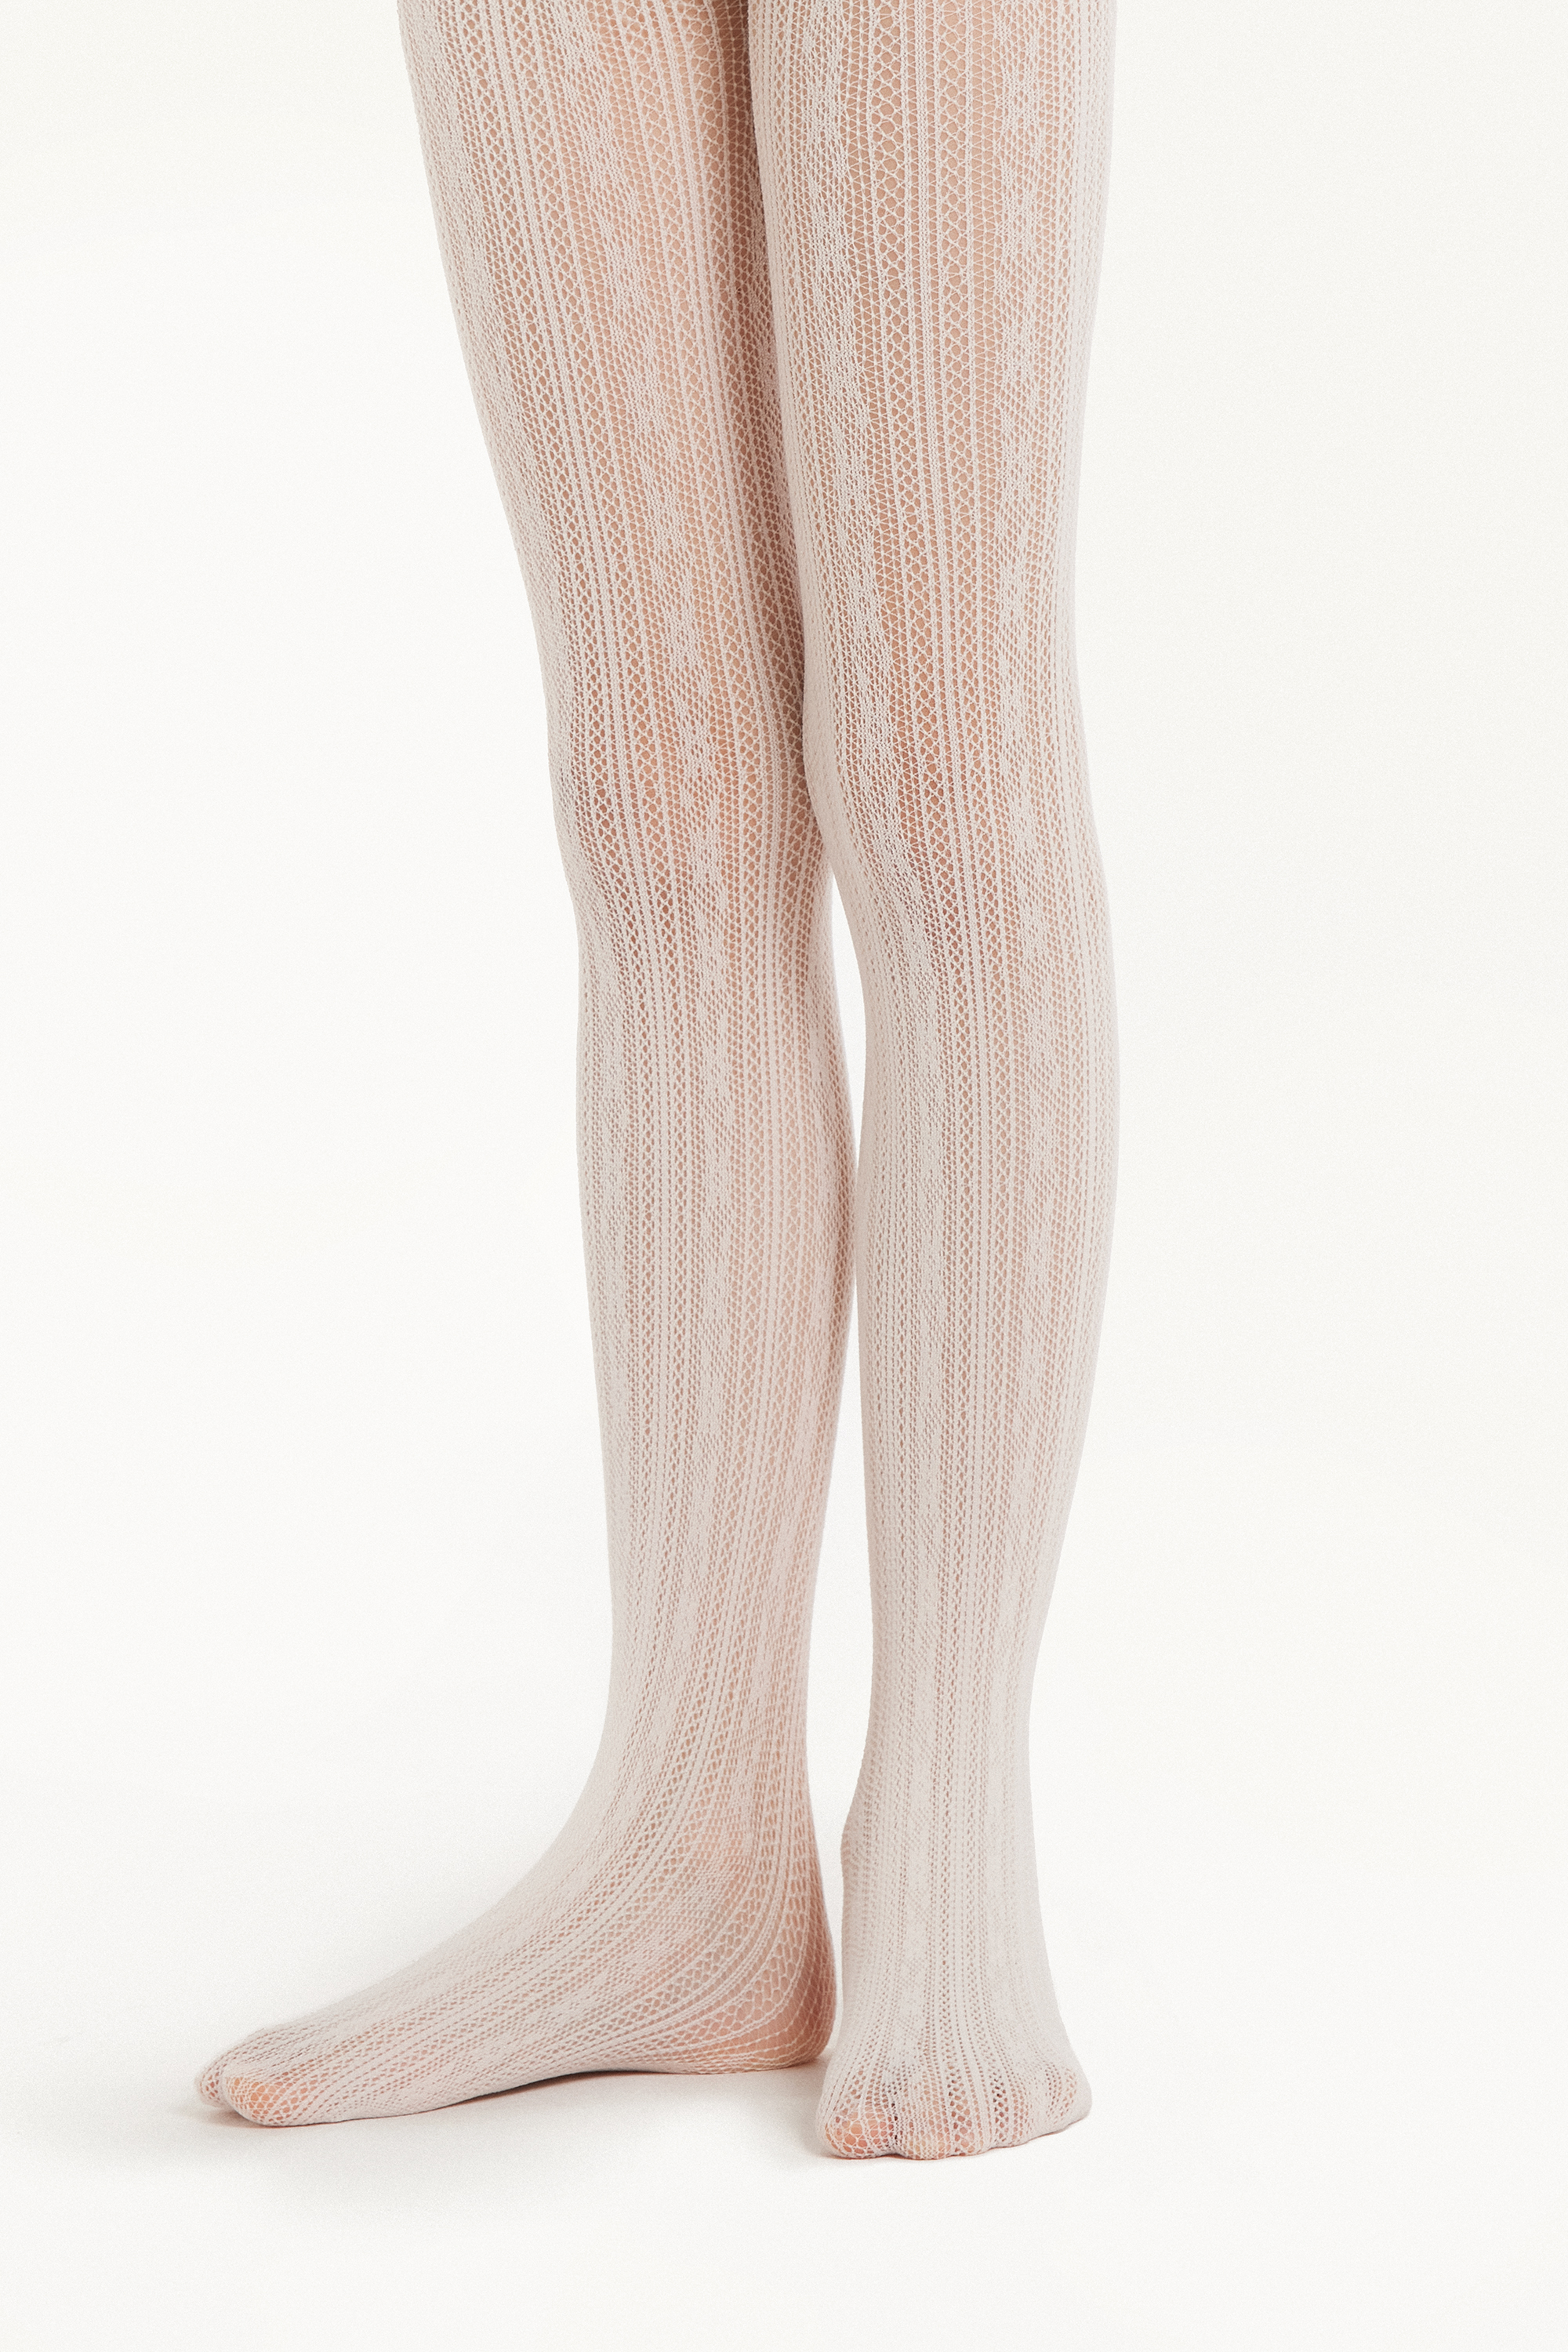 Girls’ Floral Striped Mesh Tights